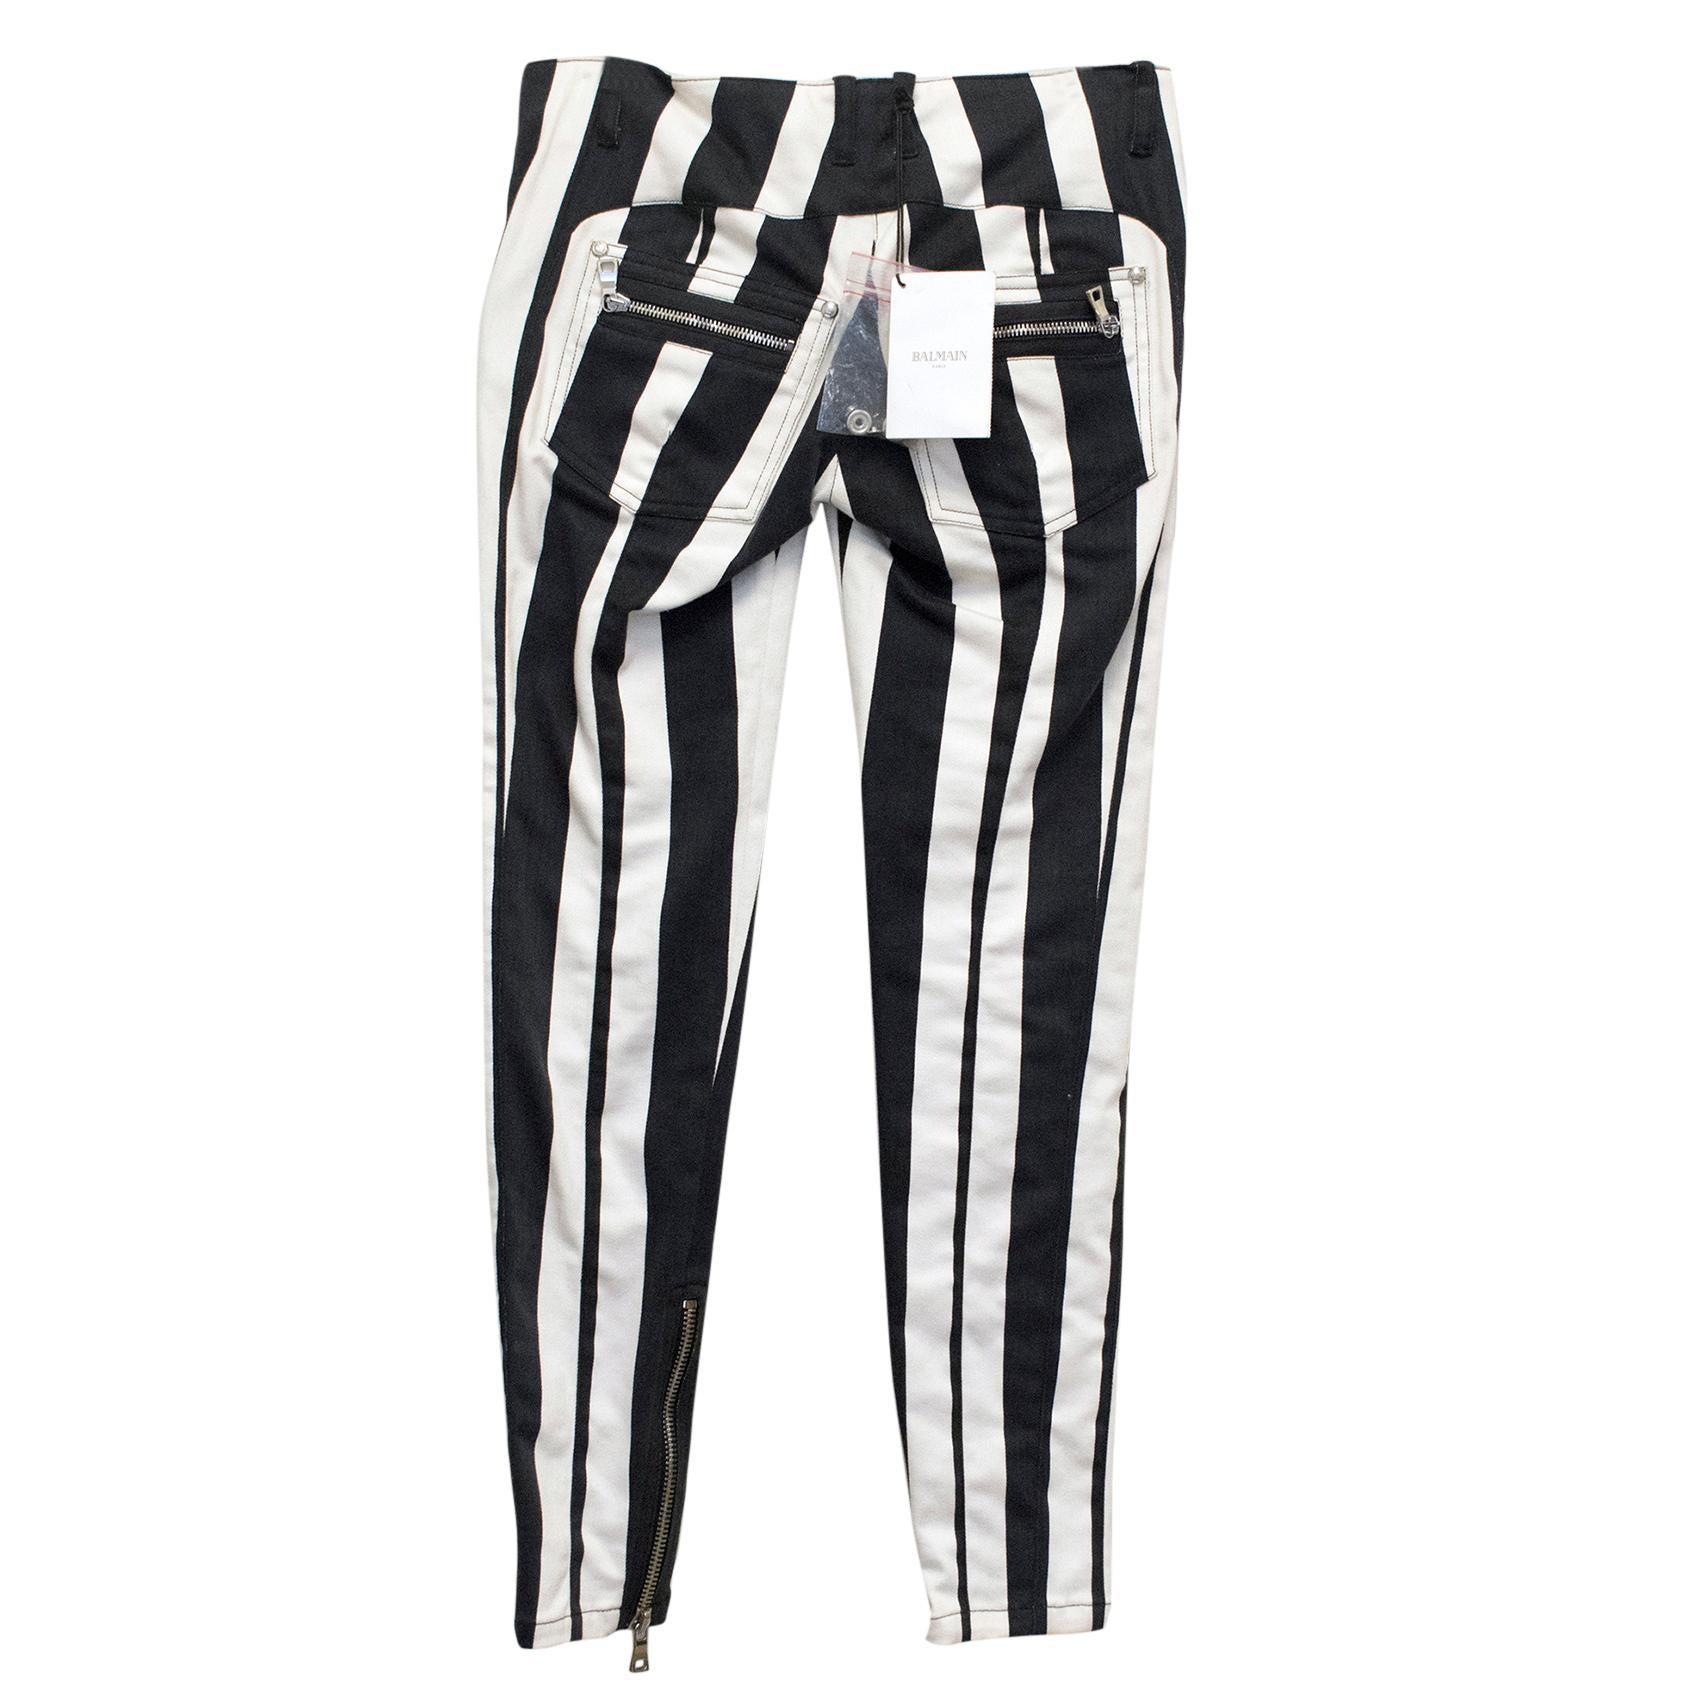 New black and white stripped Balmain skinny jeans. Silver buttons accent the belt loops, pockets, and front zipper closure. Zippers line the legs from the bottom hem on both sides, the 2 front, and the 2 back pockets. Comes with extra replacement